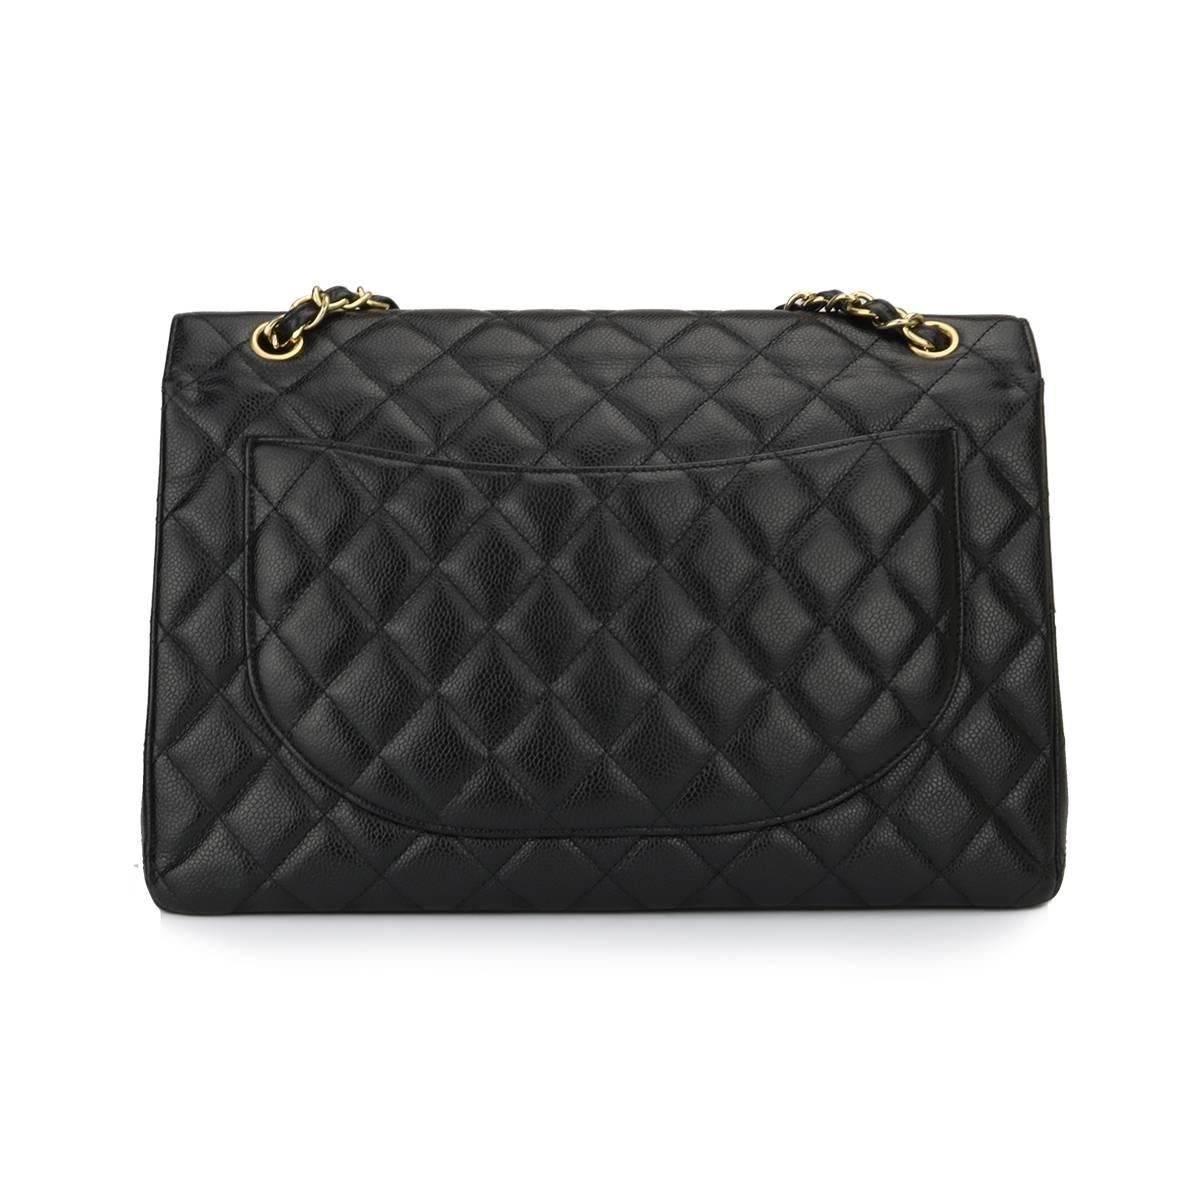 Authentic CHANEL Black Caviar Maxi Double Flap with Gold Hardware 2012.

This stunning bag is in an excellent condition, the bag still holds its shape quite well and the hardware is still very shiny, a brand new CC clasp has been replaced by